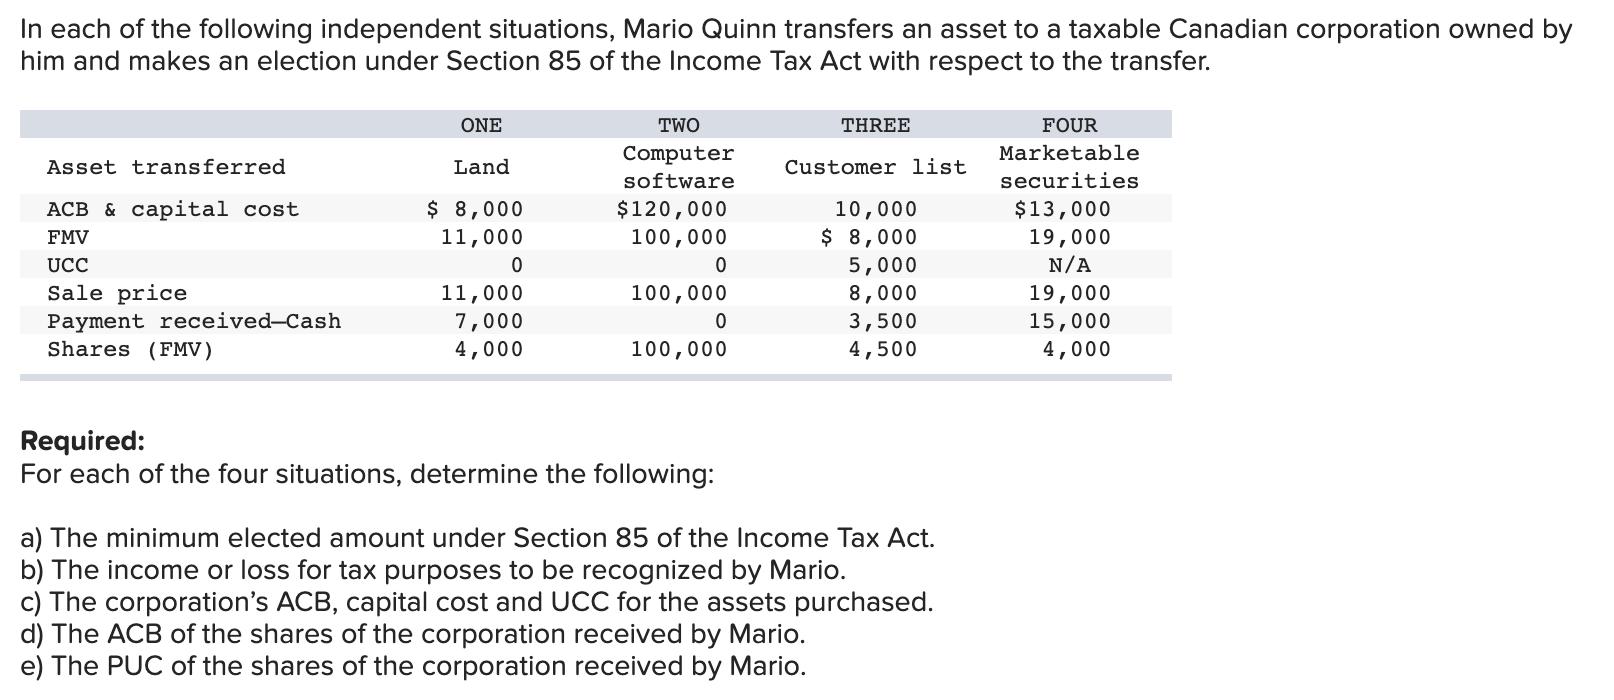 In each of the following independent situations, Mario Quinn transfers an asset to a taxable Canadian